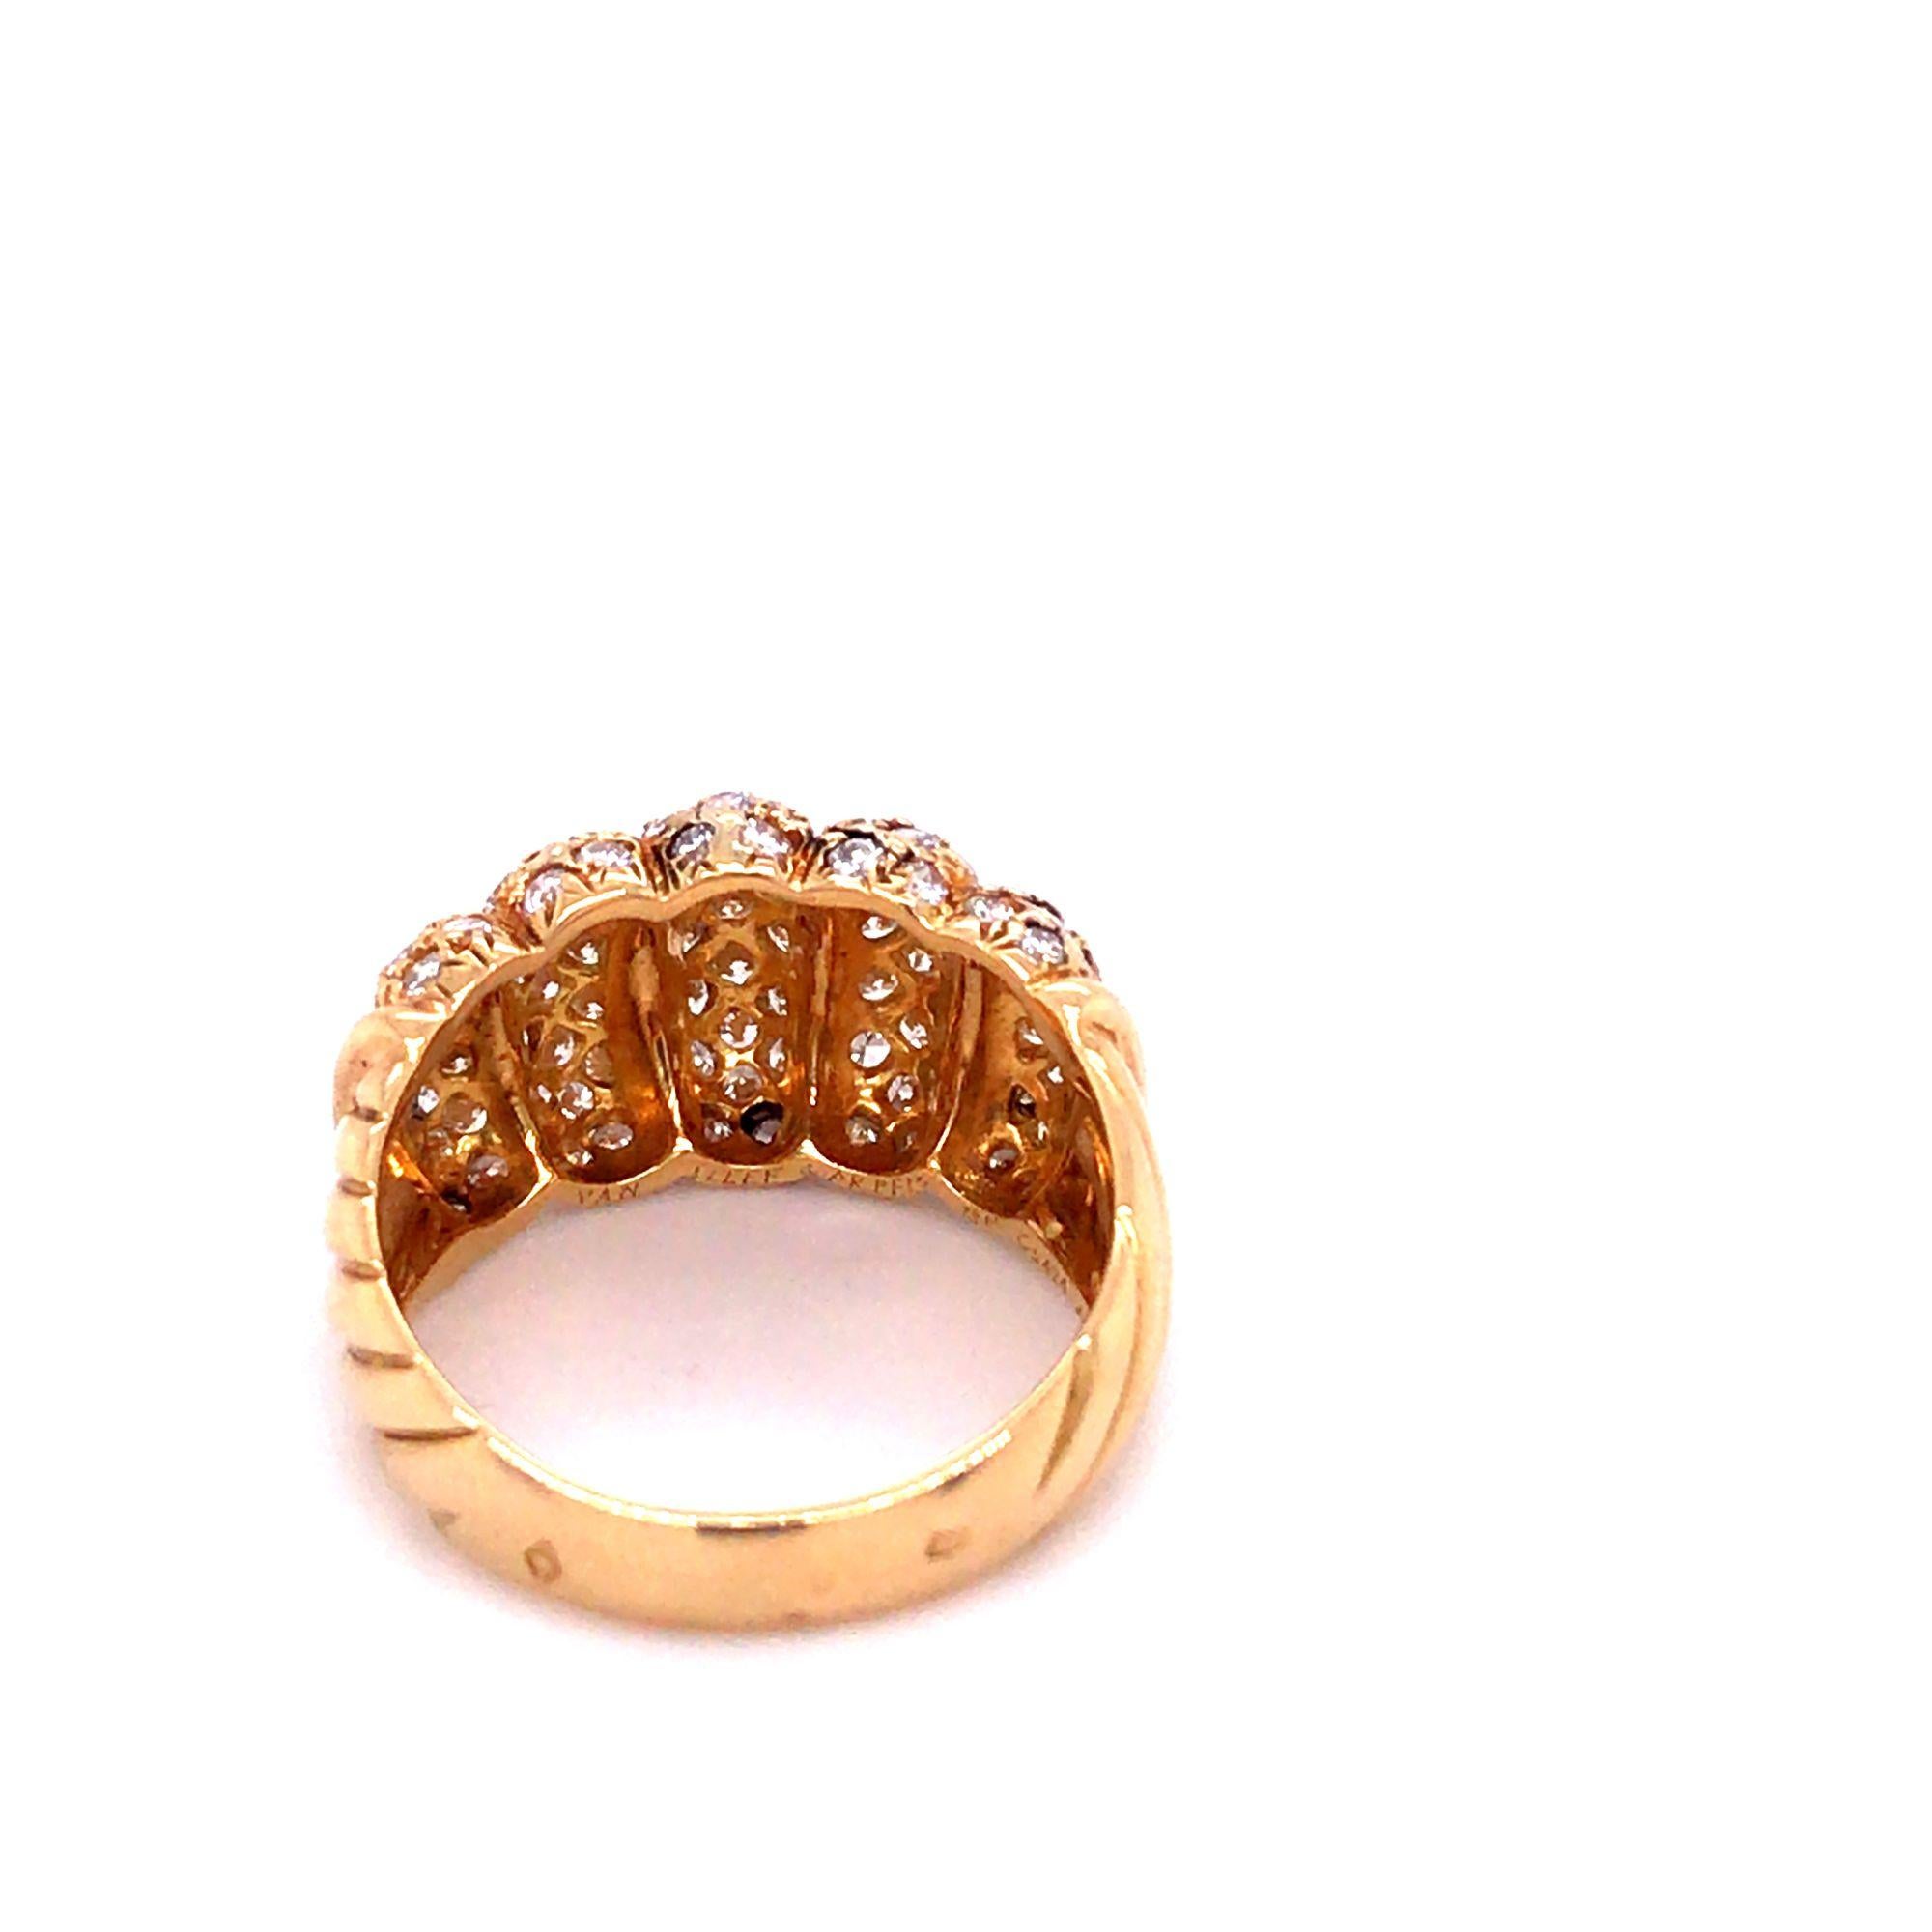 Round Cut Van Cleef & Arpels 18k Gold and Diamond Ring For Sale